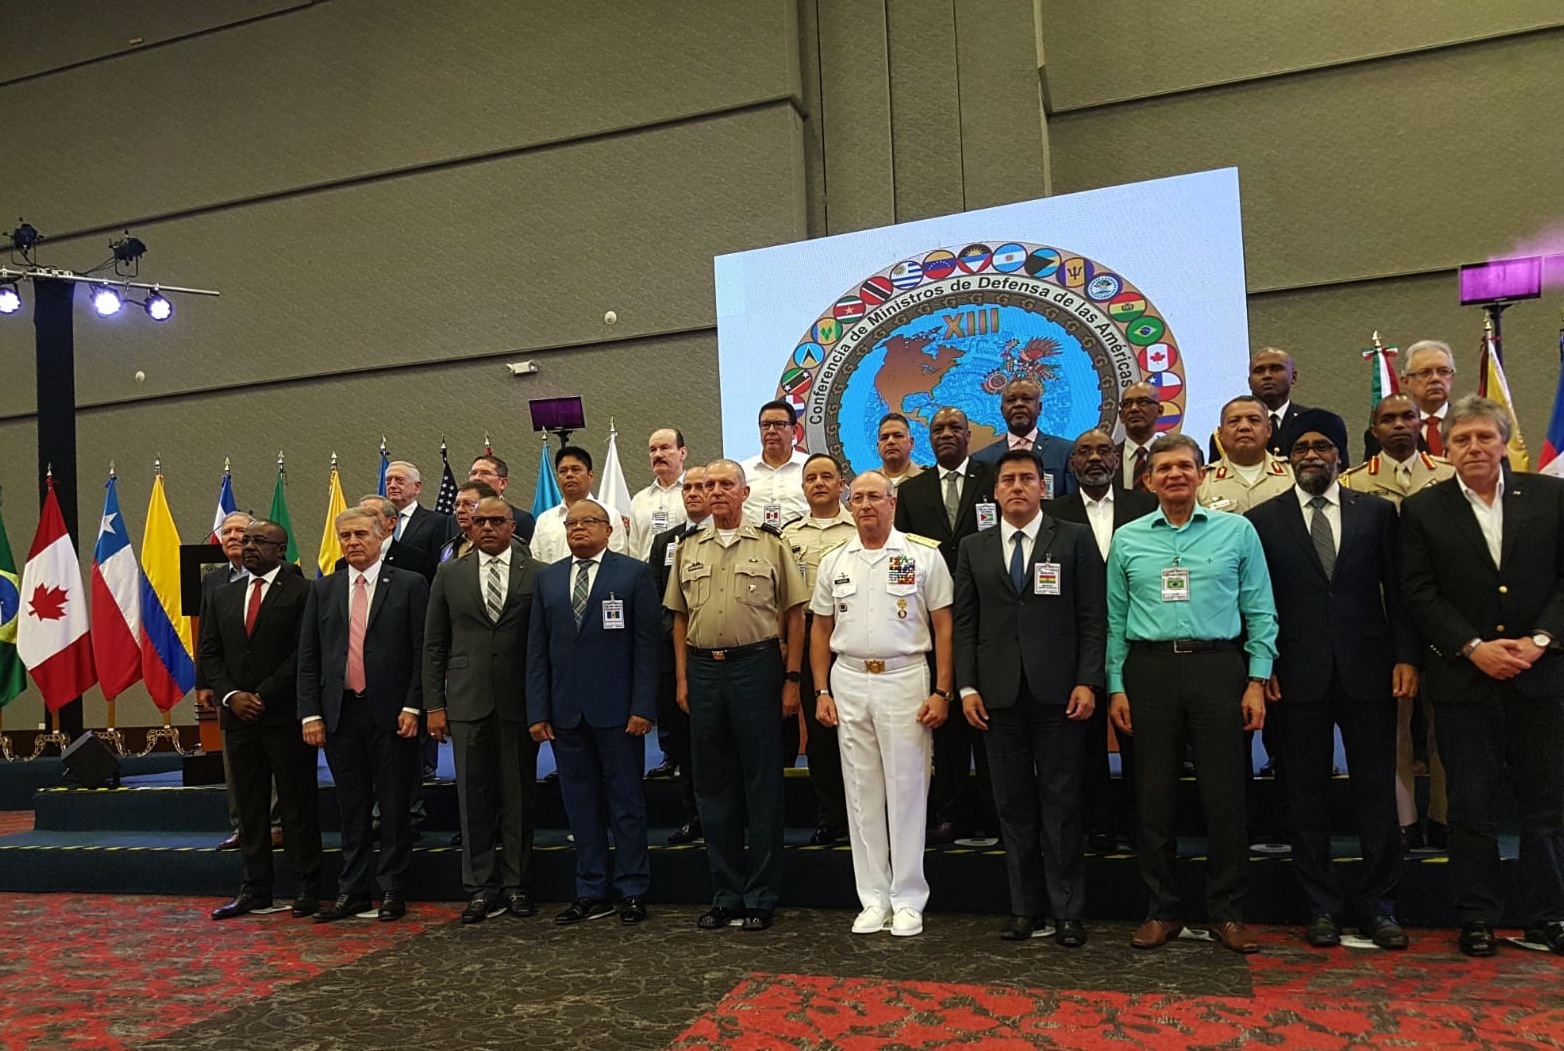 MINISTER DAMES, MINISTER OF NATIONAL SECURITY, ATTENDS THE XIII CONFERENCE OF DEFENSE MINISTERS OF THE AMERICAS CANCUN, MEXICO, 7th – 10th OCTOBER, 2018